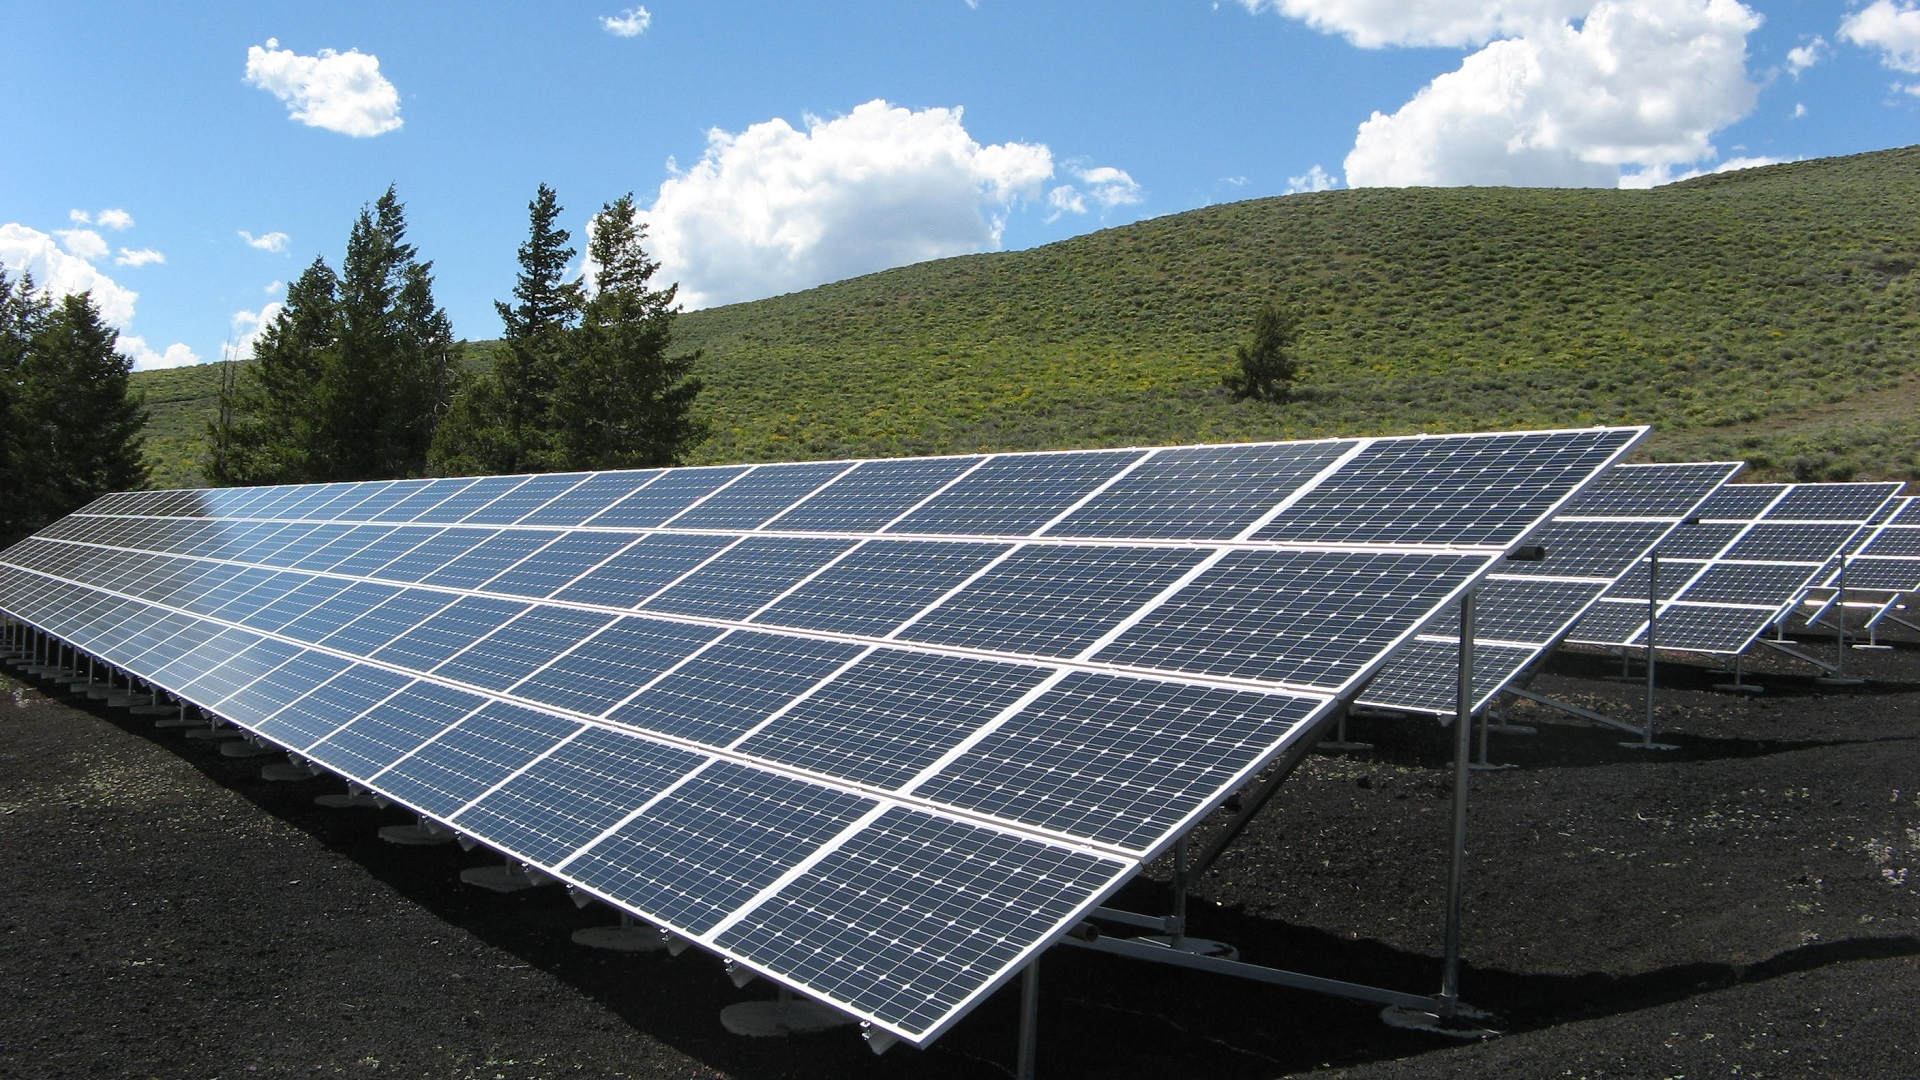 RWE Supply and Trading Solar Project